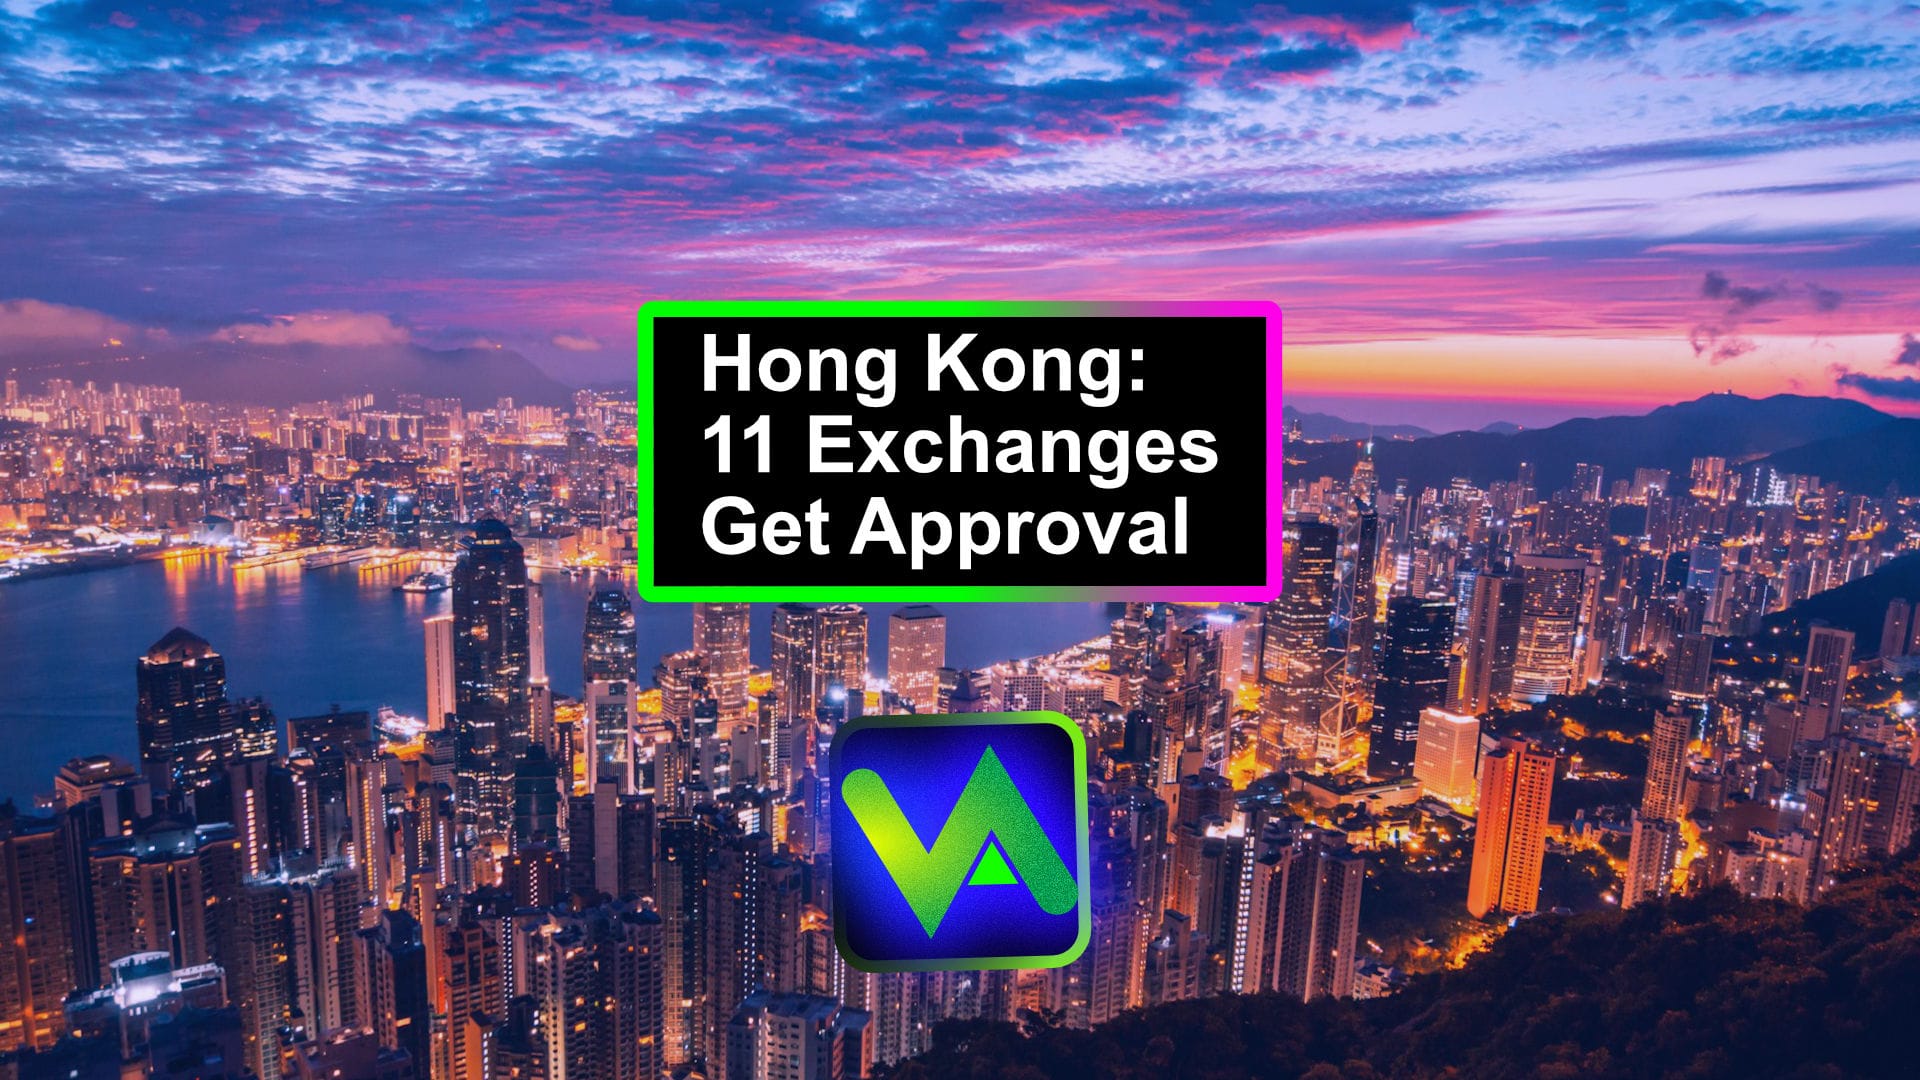 Hong Kong Advances Virtual Assets Regulation with 11 Exchange Approvals